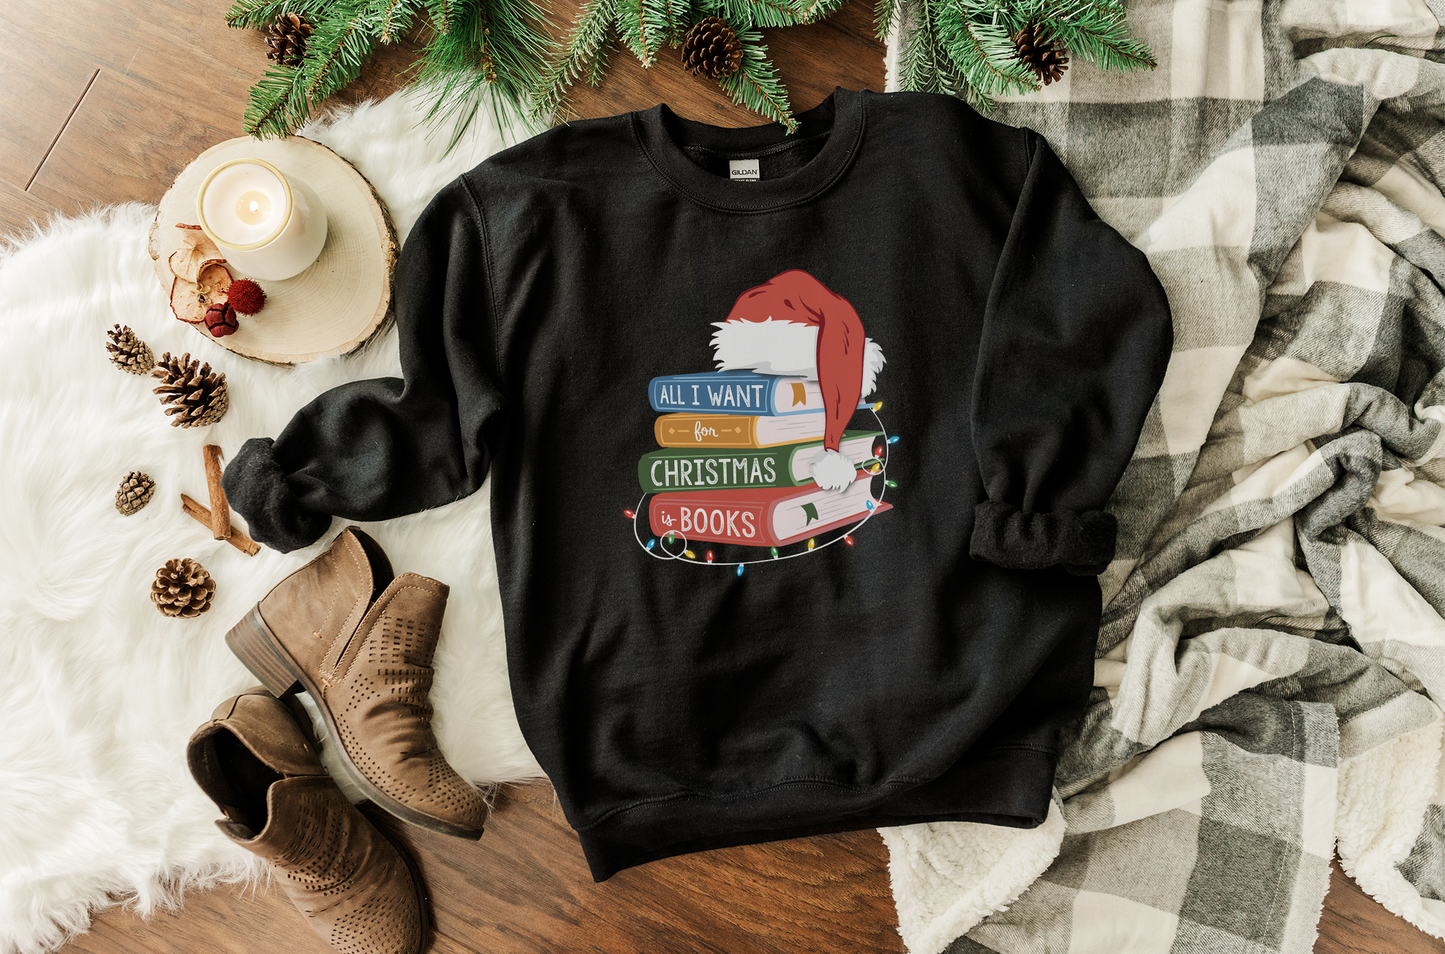 all i want for christmas is books (book stack) sweatshirt